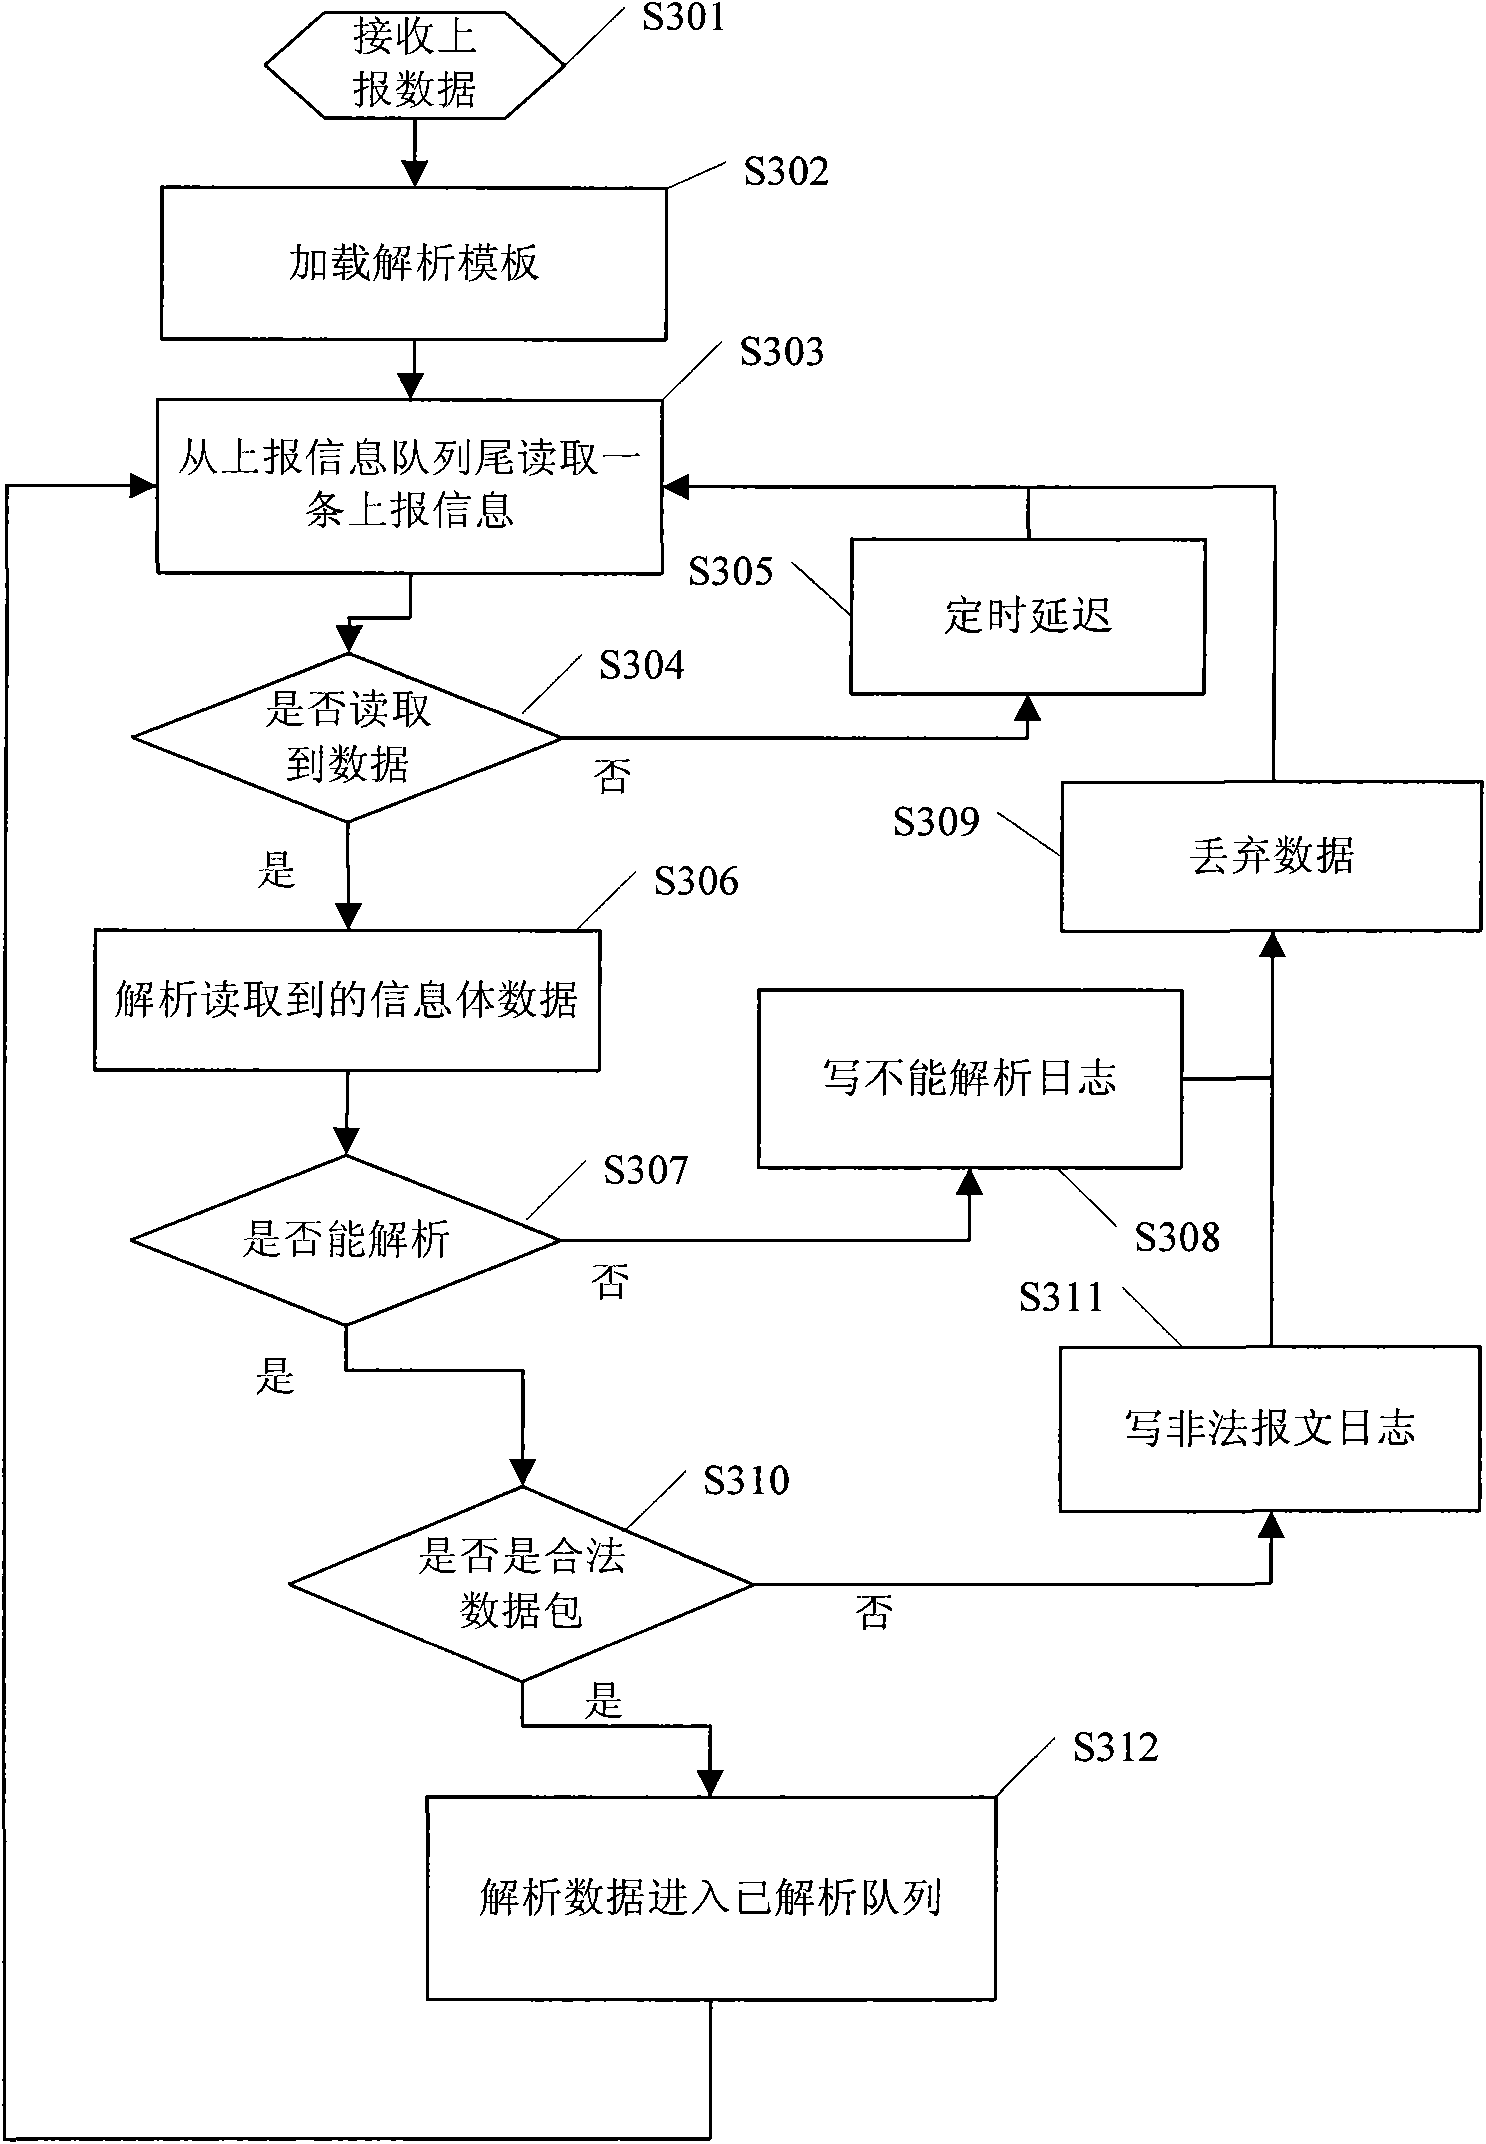 Service workflow process recognition method